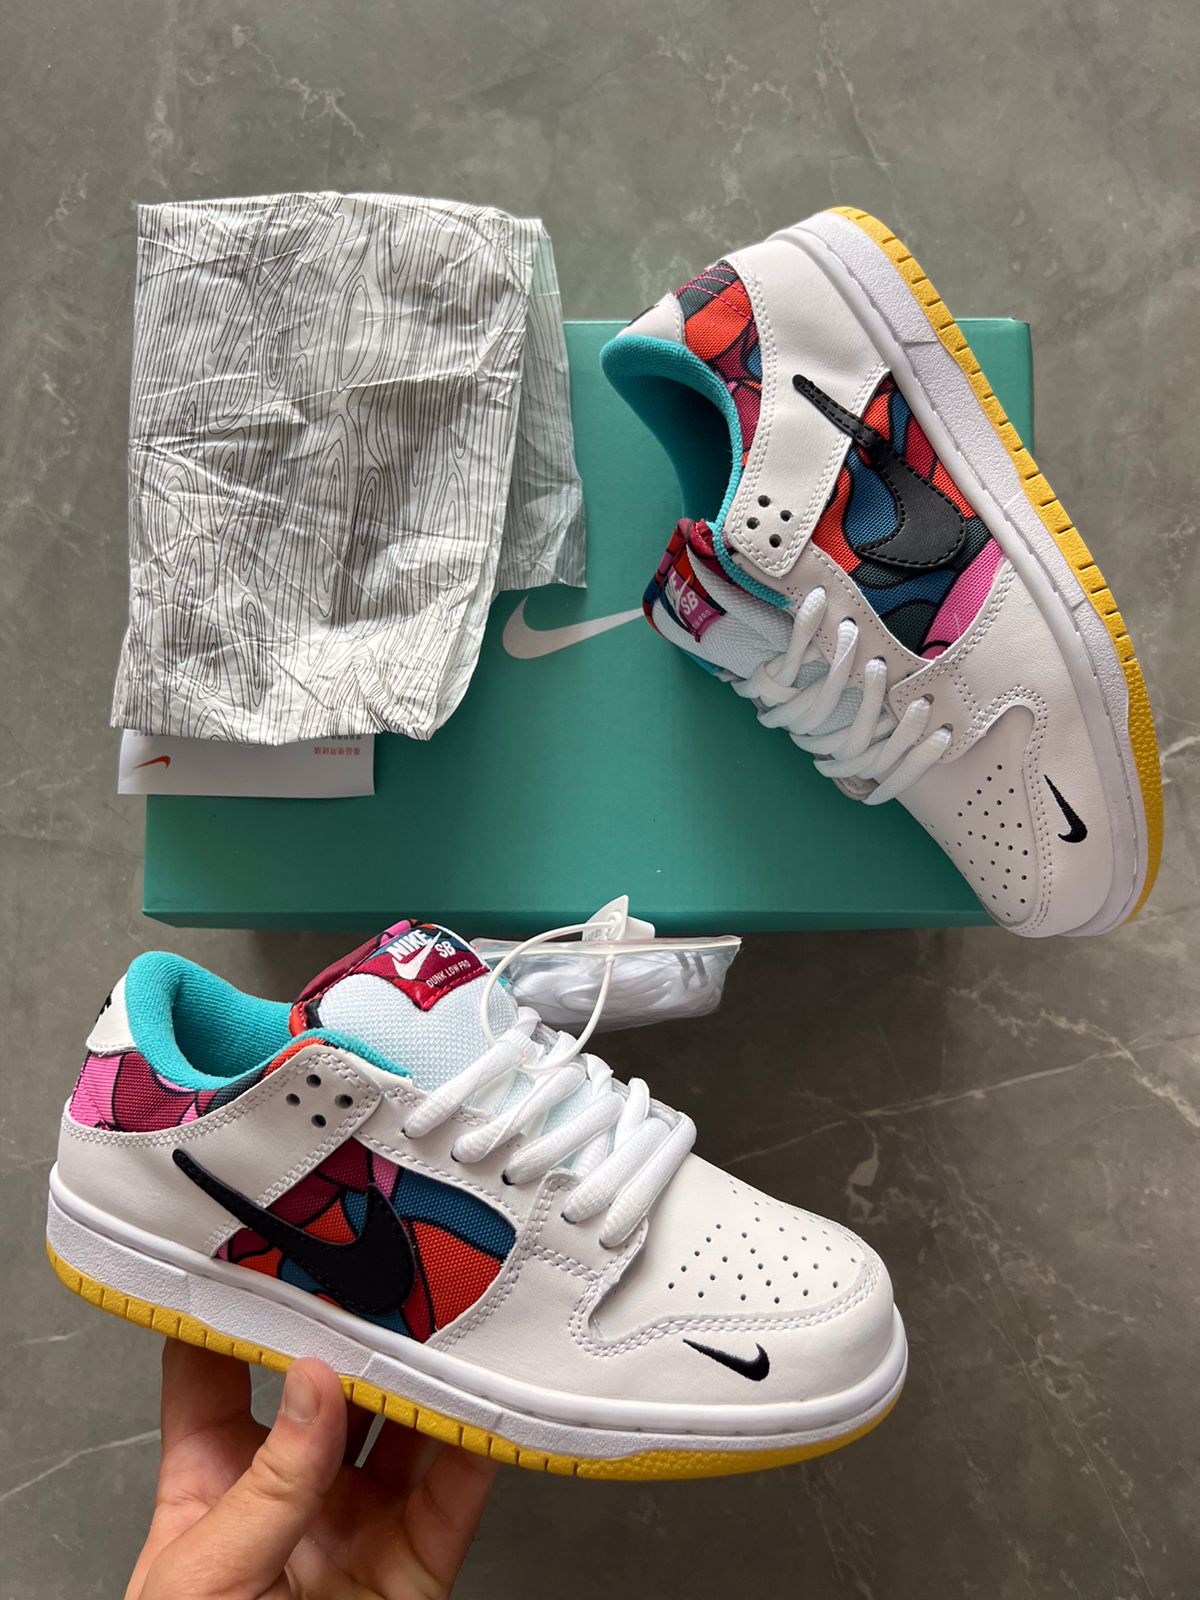 SB Dunk Parra 2 Sneakers For Girls